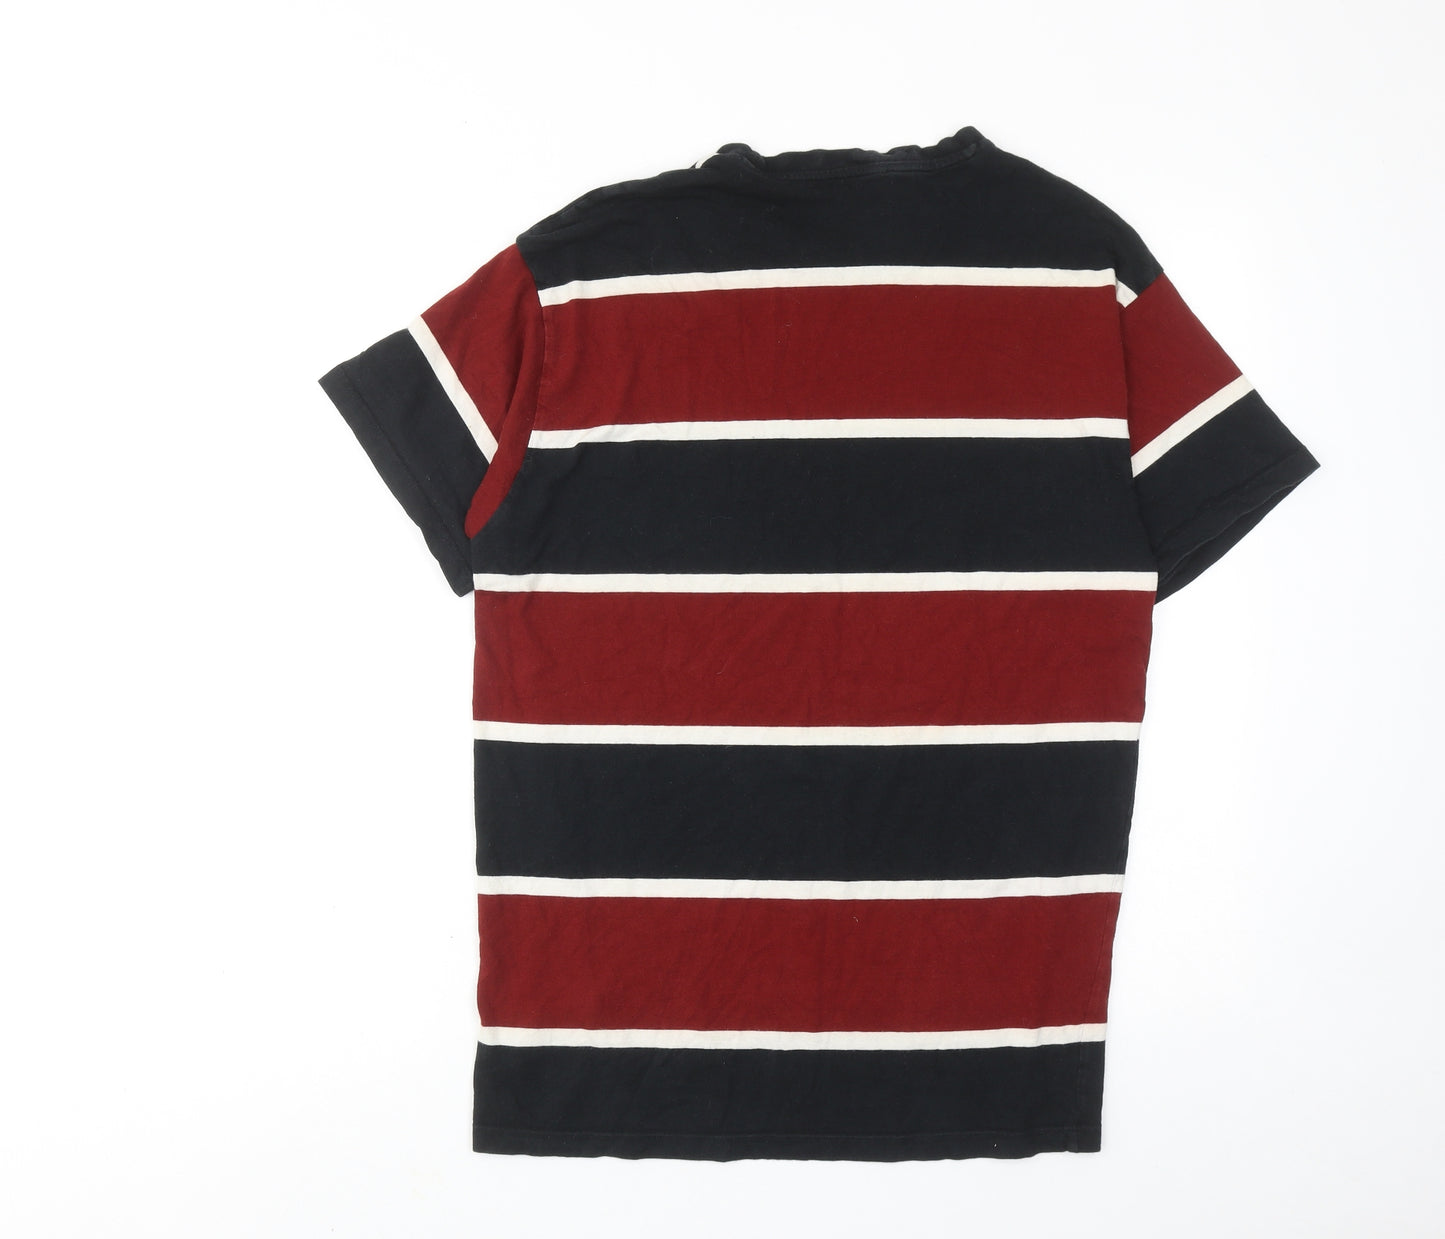 New Look Mens Red Striped Cotton T-Shirt Size M Round Neck